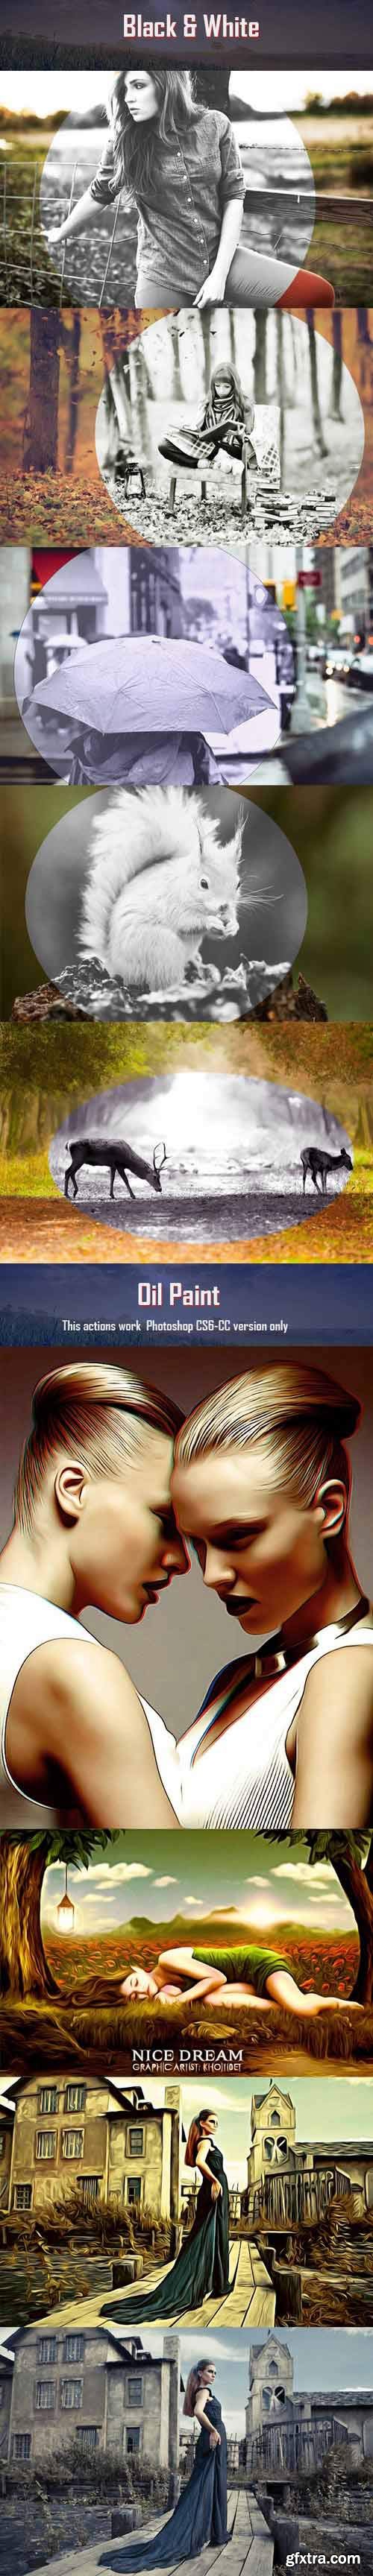 GraphicRiver - Mixed Photo Actions 9373116